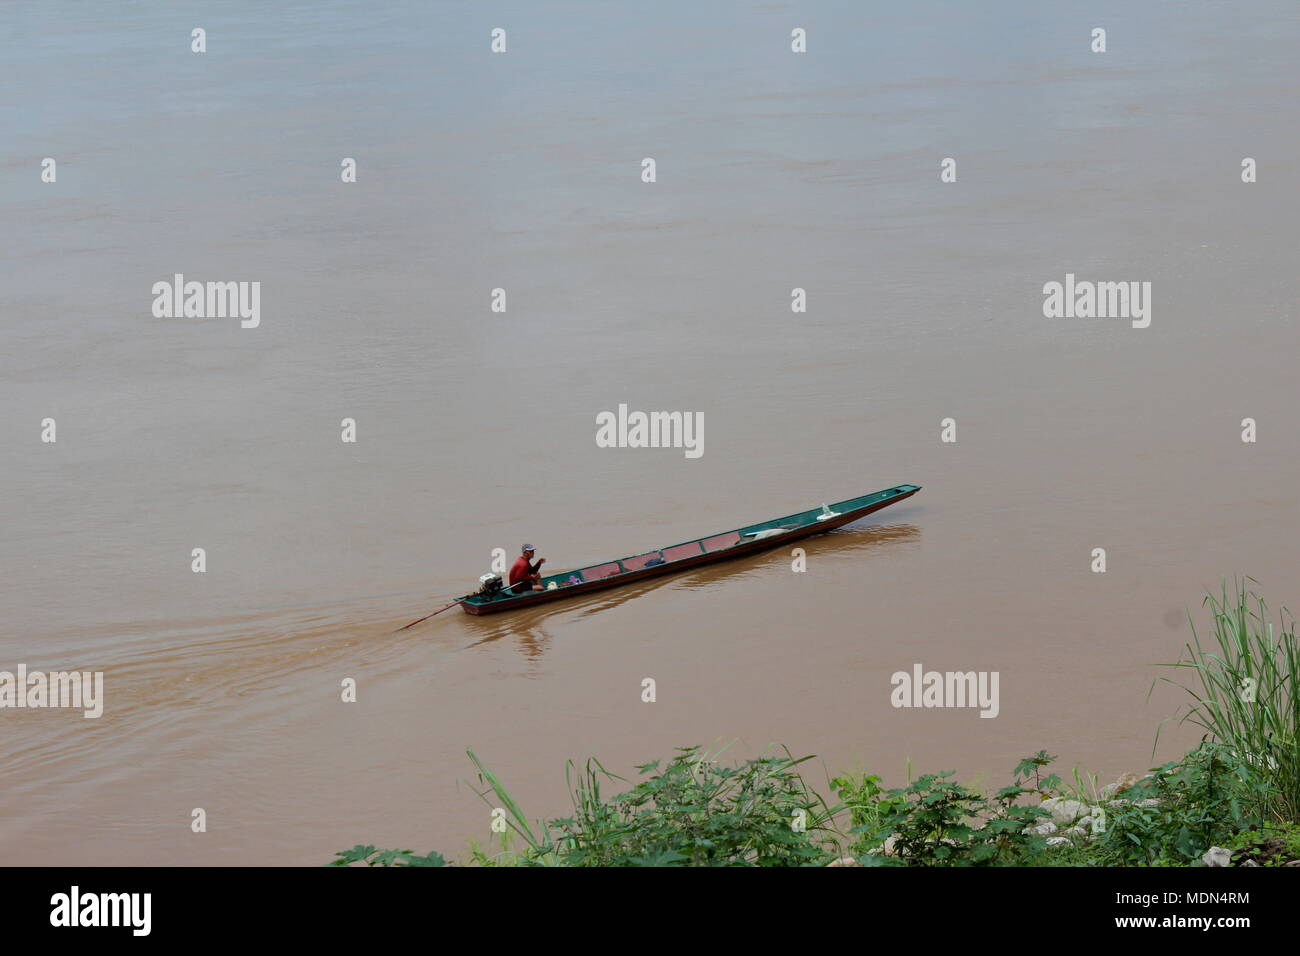 A boater on the Mekong River near Wat Sibounheuang temple, Vientiane, Laos, 2016. Stock Photo